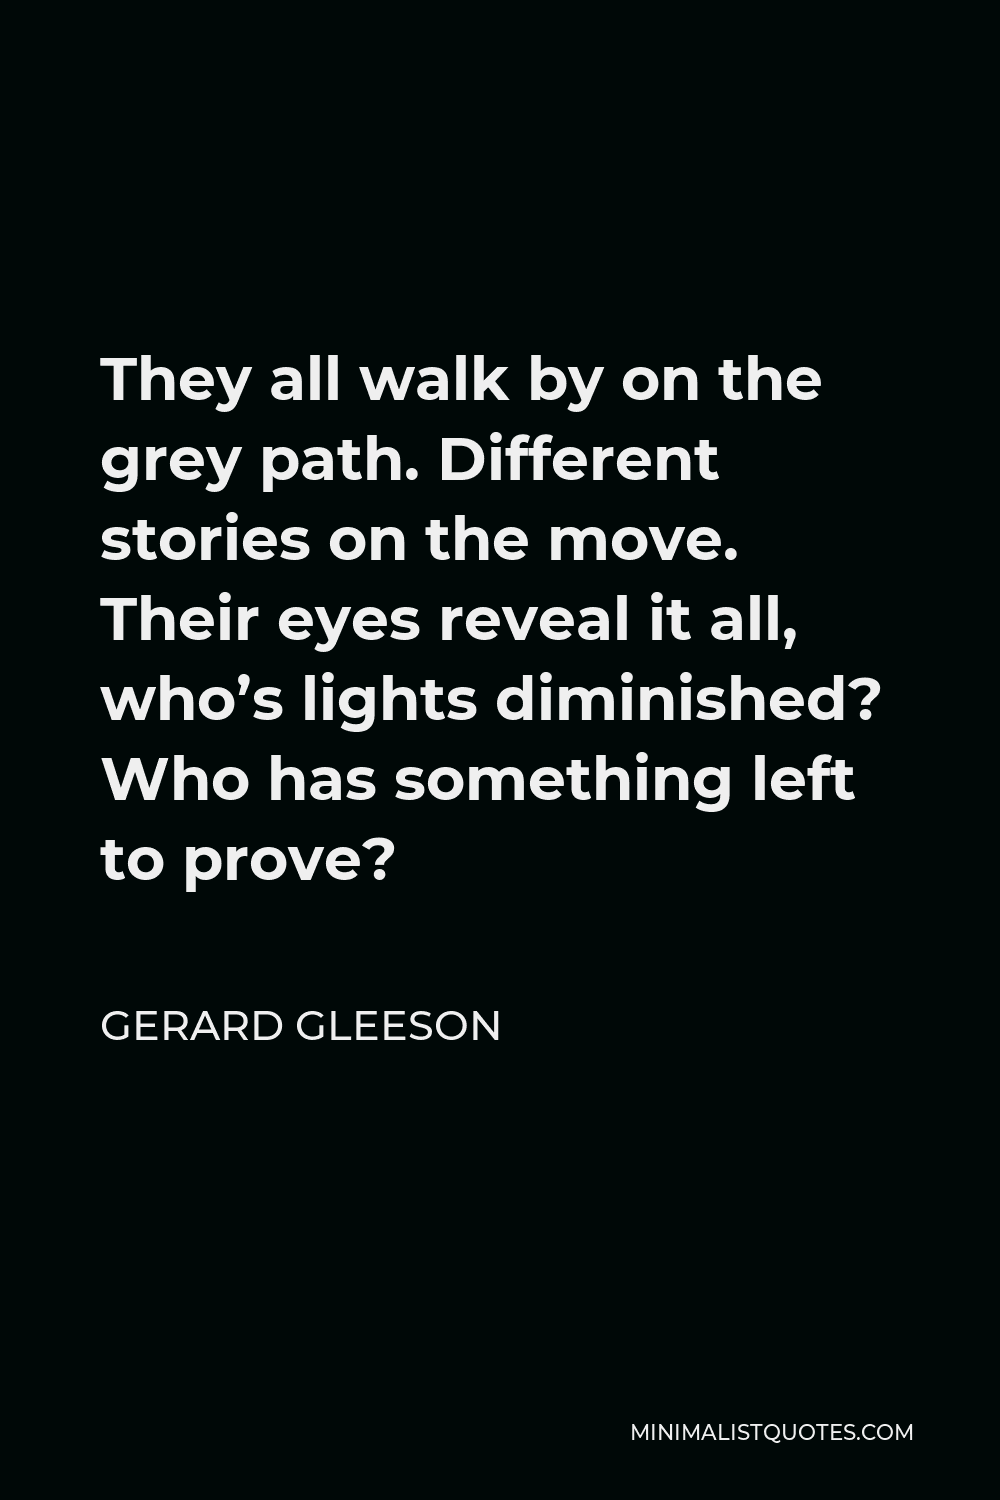 Gerard Gleeson Quote - They all walk by on the grey path. Different stories on the move. Their eyes reveal it all, who’s lights diminished? Who has something left to prove?